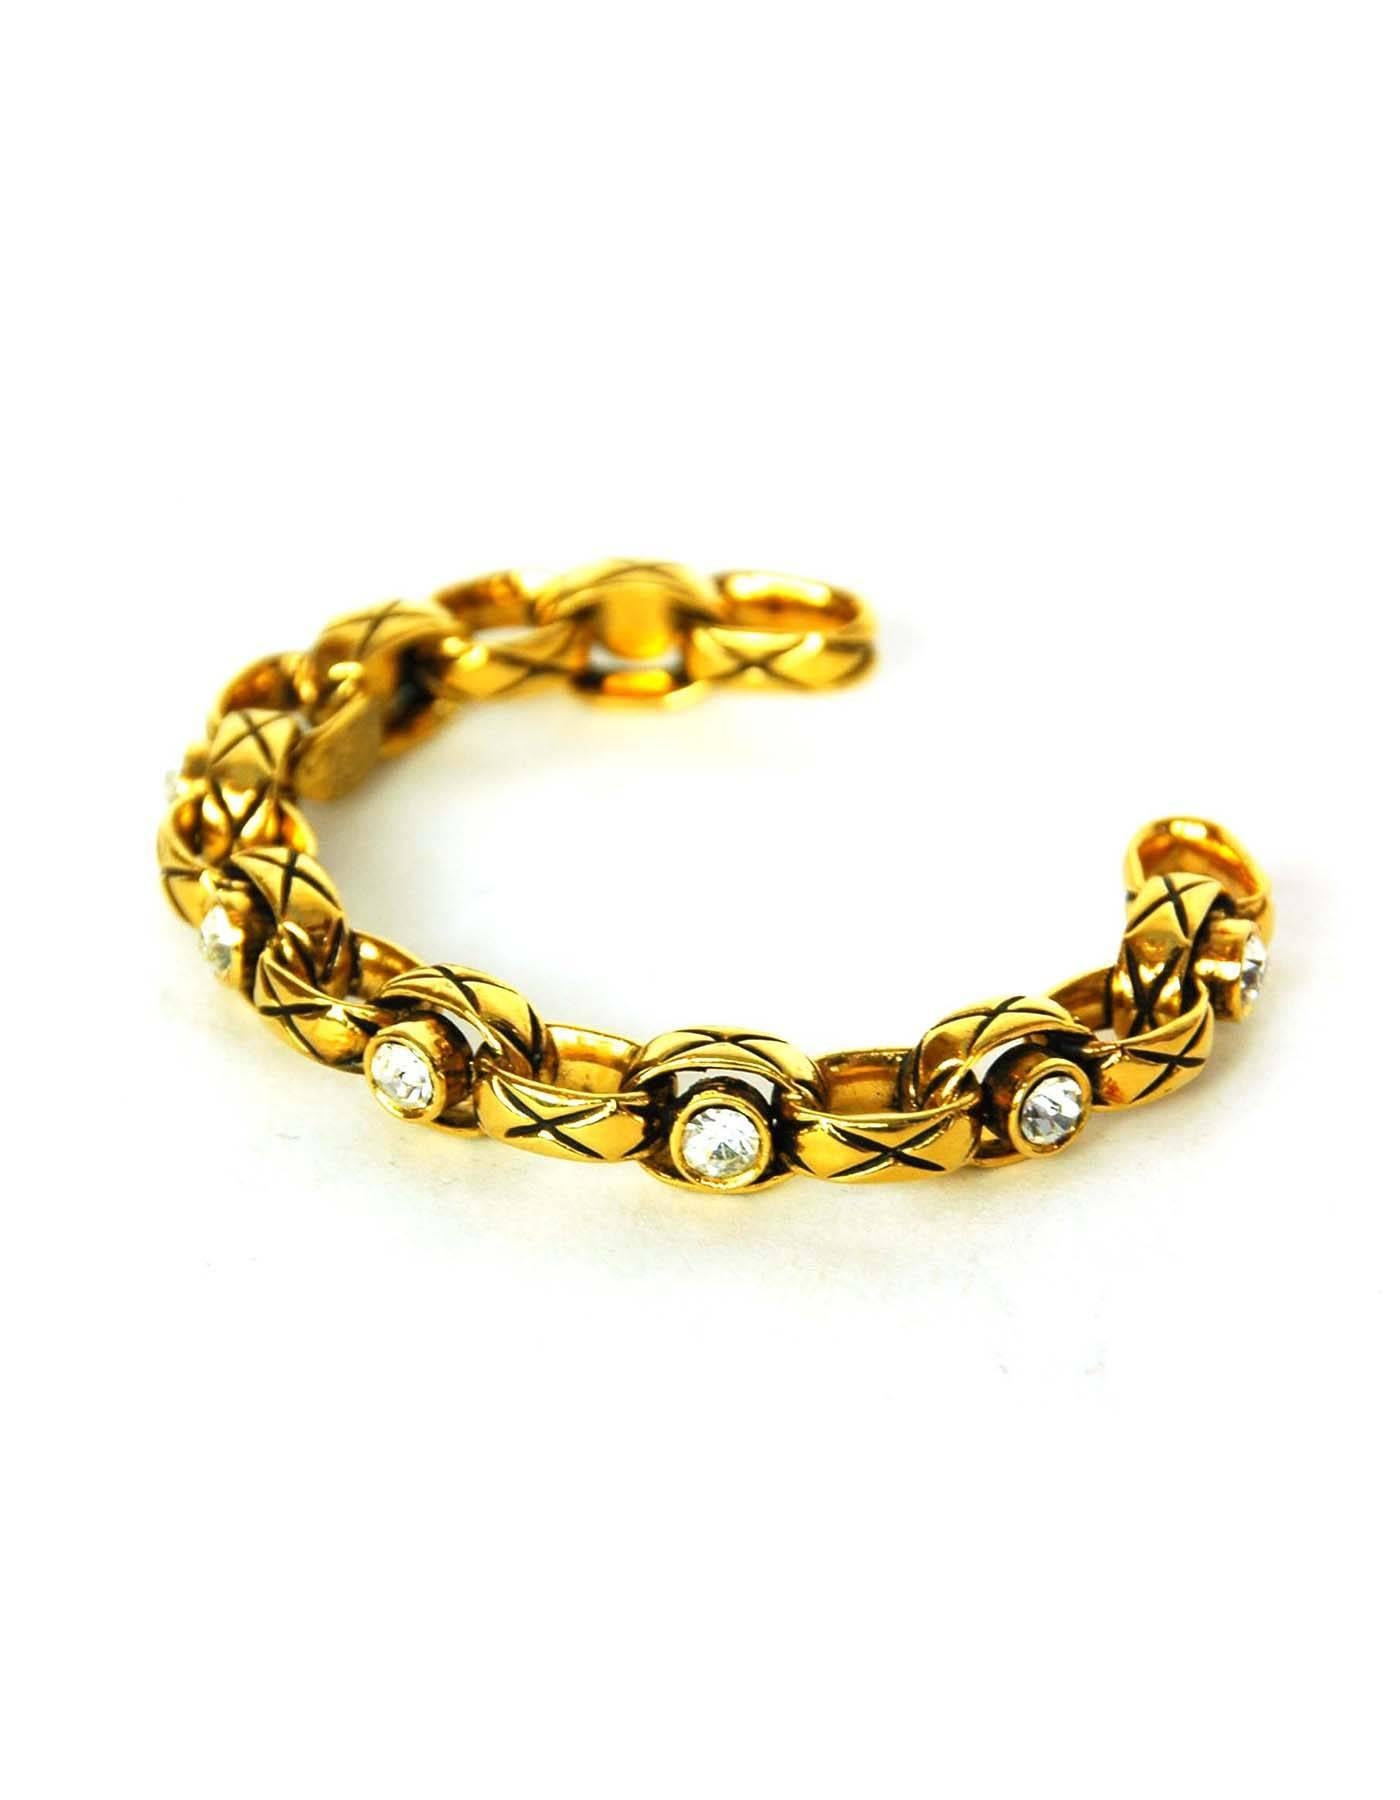 Chanel Vintage '86 Crystal & Gold Cuff Bracelet
Features quilting at goldtone chain links

Made In: France
Year of Production: 1986
Color: Goldtone and clear
Materials: Metal and crystal
Closure: None
Stamp:  2 CC 3
Overall Condition: Excellent